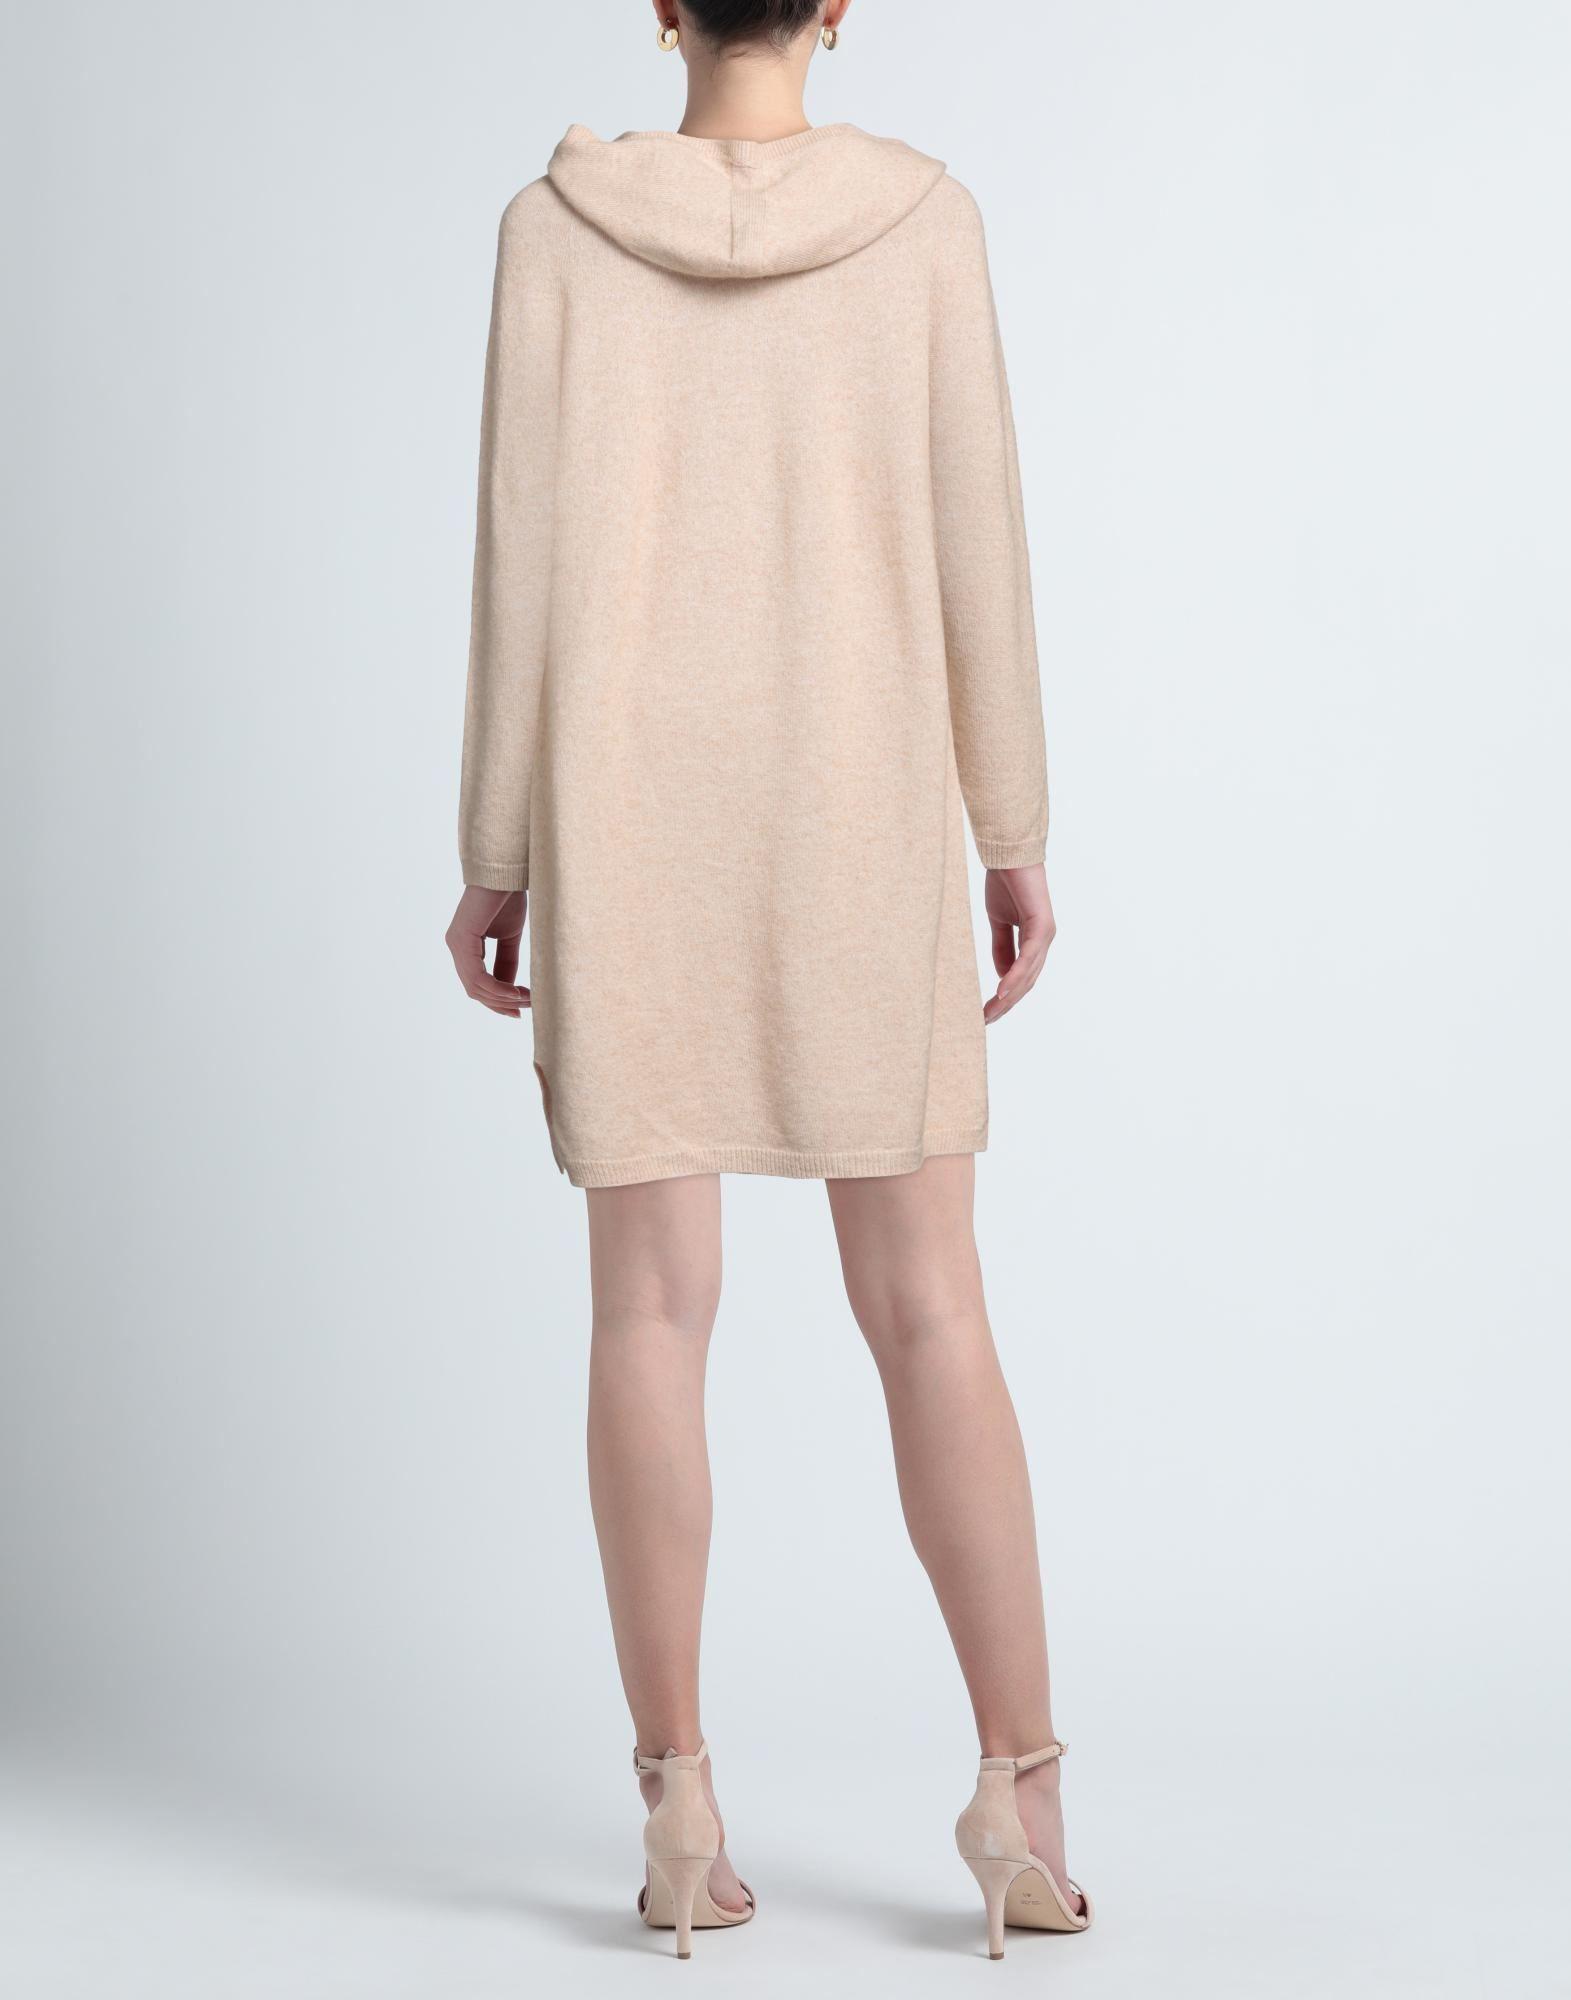 Cappellini By Peserico Short Dress in Natural | Lyst